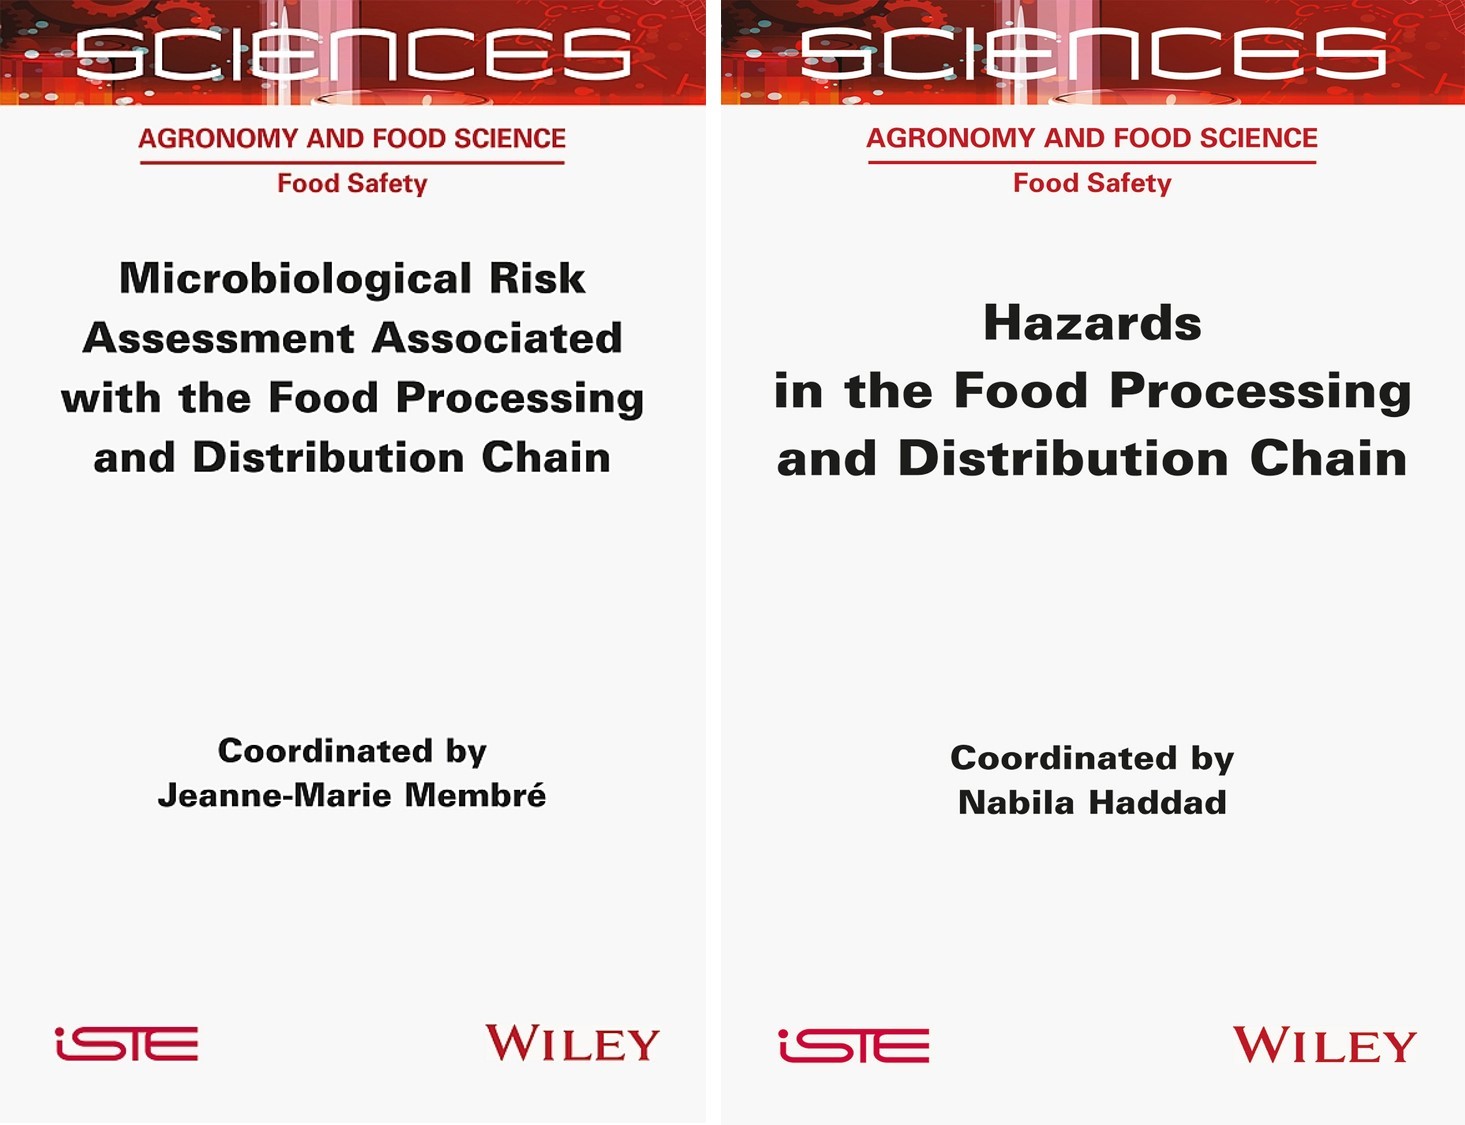 Publication of a collection of 3 books on food safety